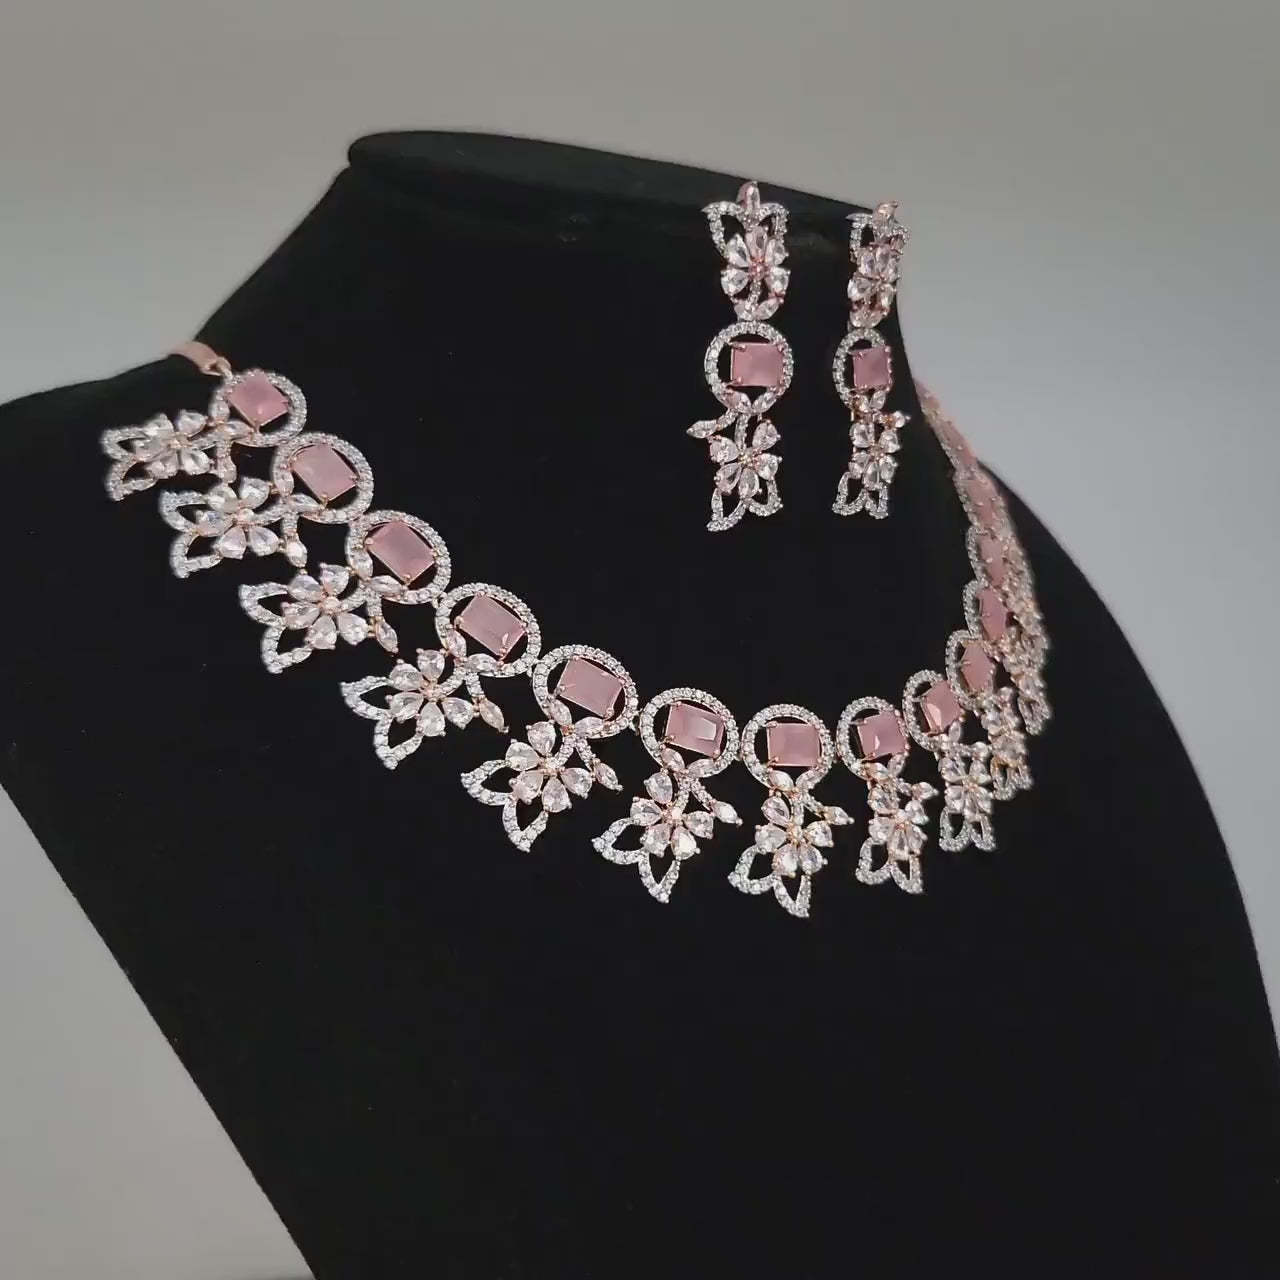 Rose Gold American Diamond CZ Choker Necklace with Earrings| Statement Wedding Jewelry|Indian Bollywood style Fashion Necklace |Gift for her